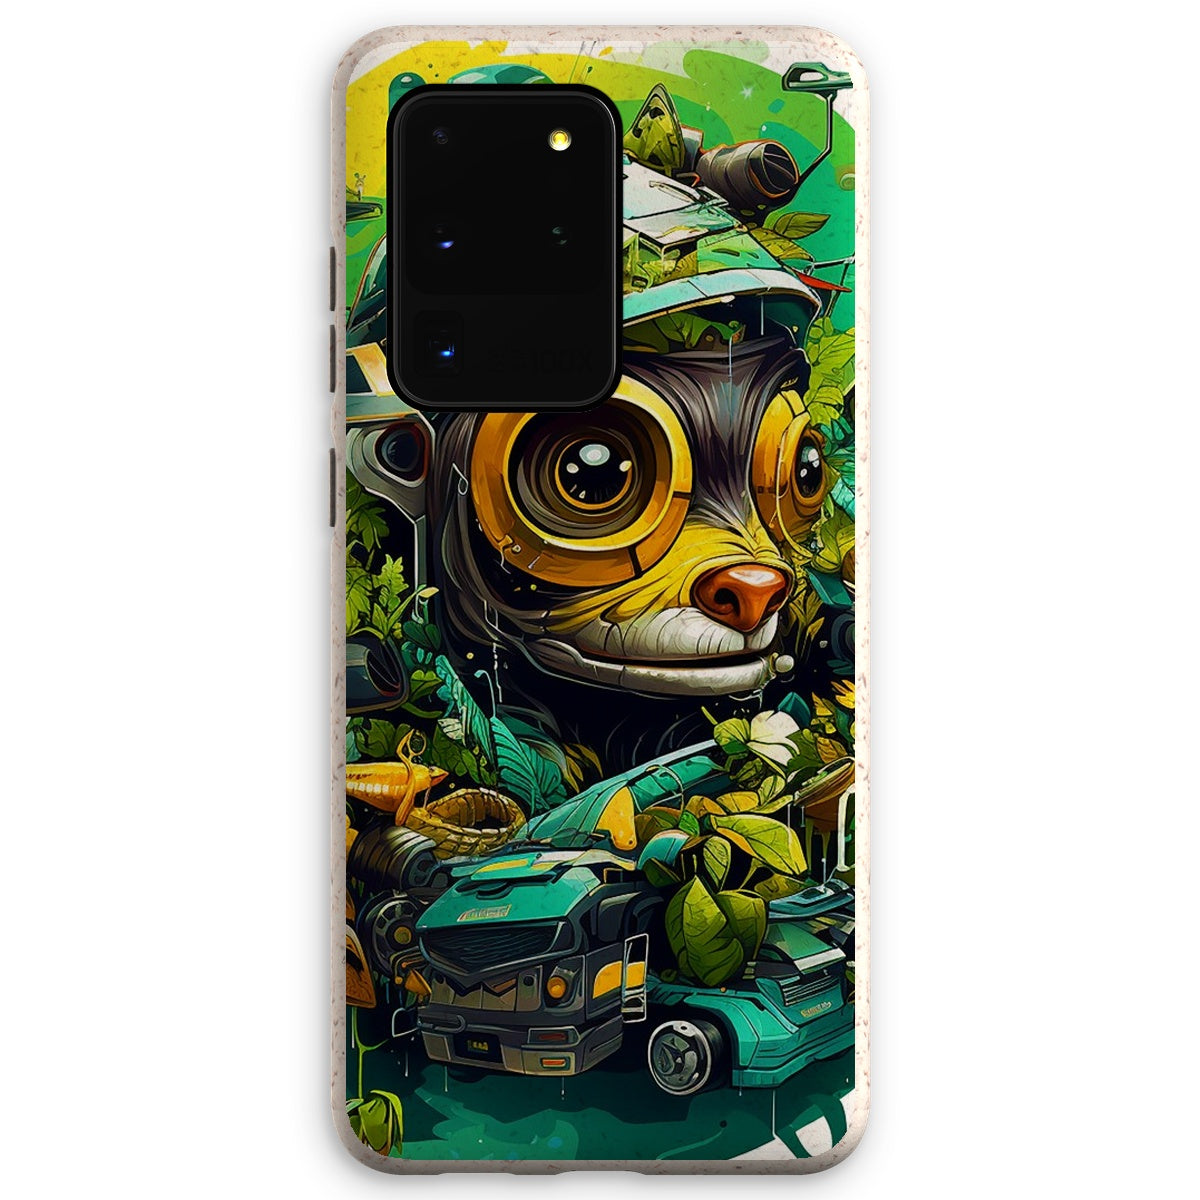 Nature's Resilience: Surreal Auto-Forest Artwork - Whimsical Raccoon and Greenery Infused Car  Eco Phone Case